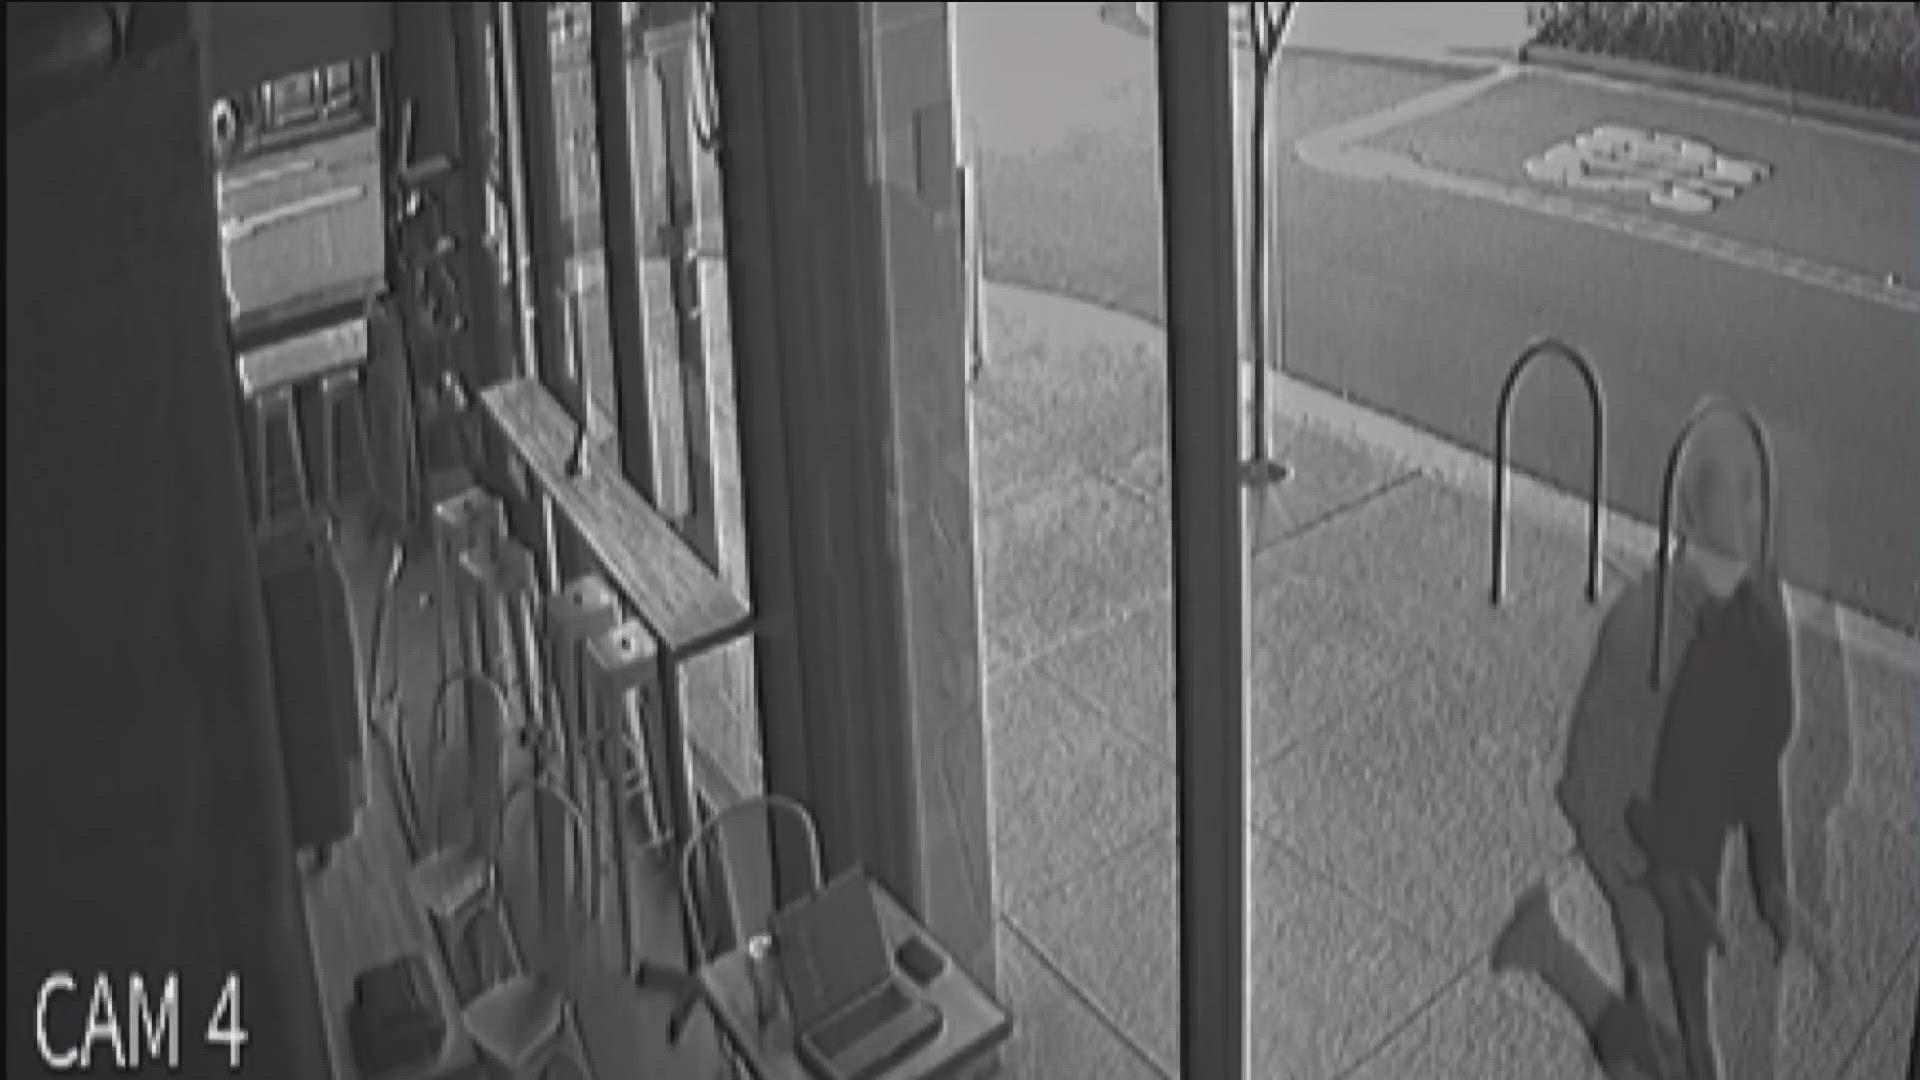 Surveillance video captures an armed man fleeing the San Diego Central Library shooting.